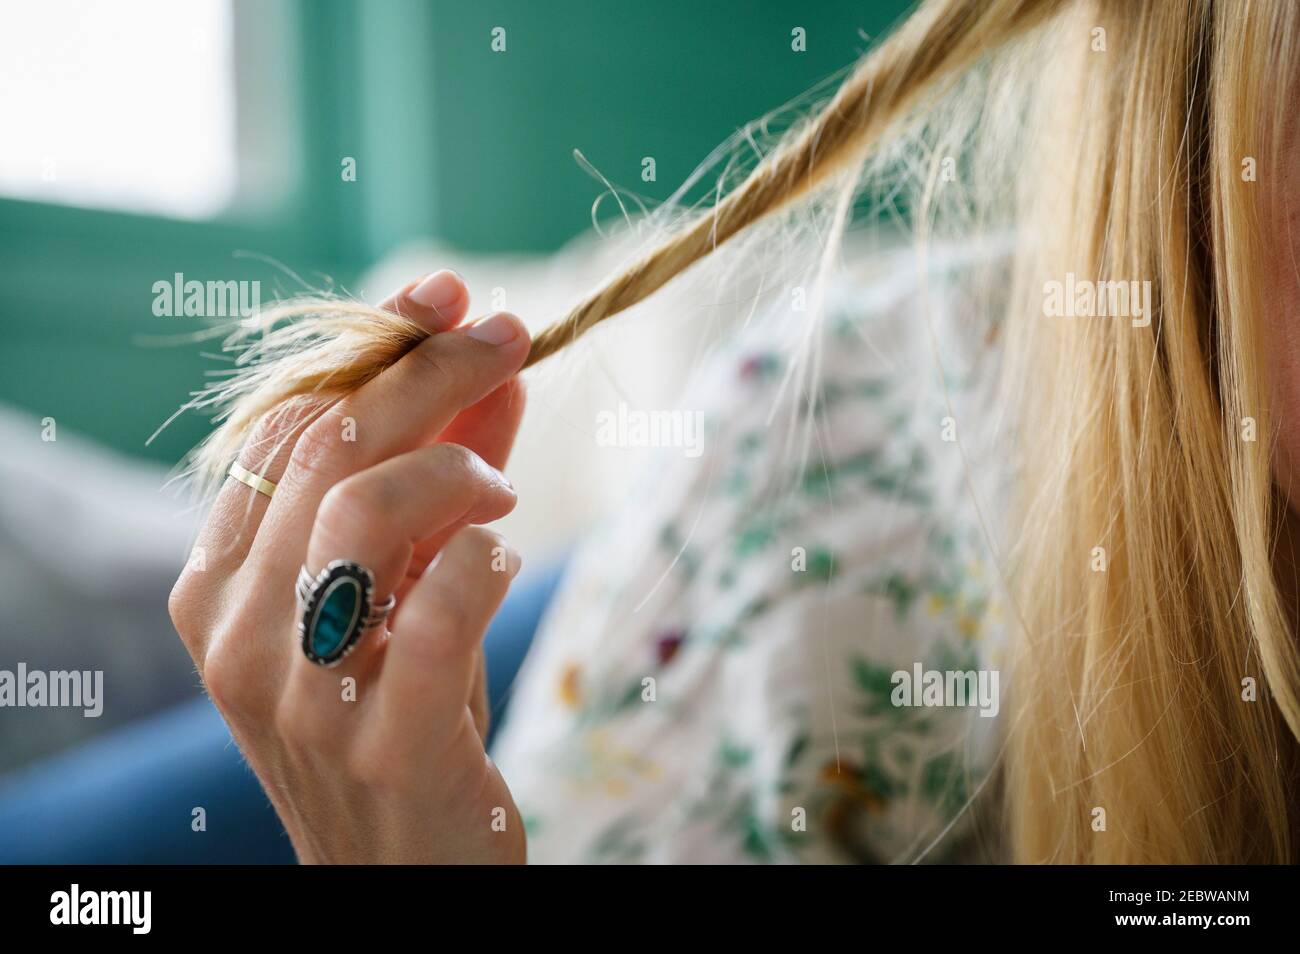 Woman touching her hair, close-up Stock Photo